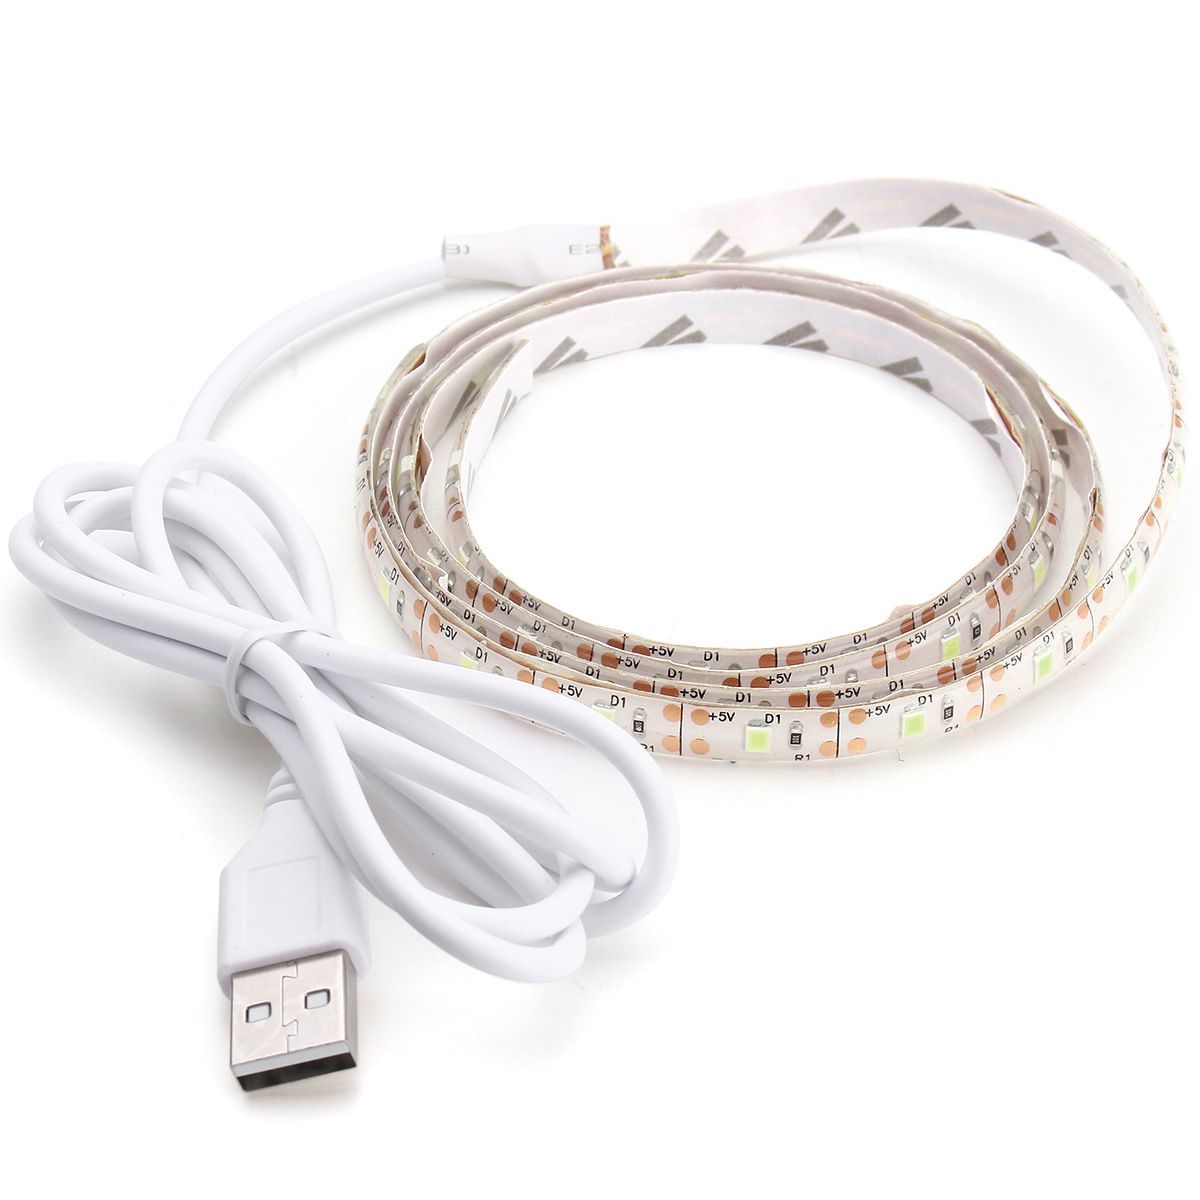 DC5V-1M-USB-Pure-White-Warm-White-Red-Blue-2835-SMD-Waterproof-LED-Strip-Backlight-for-Home-1212648